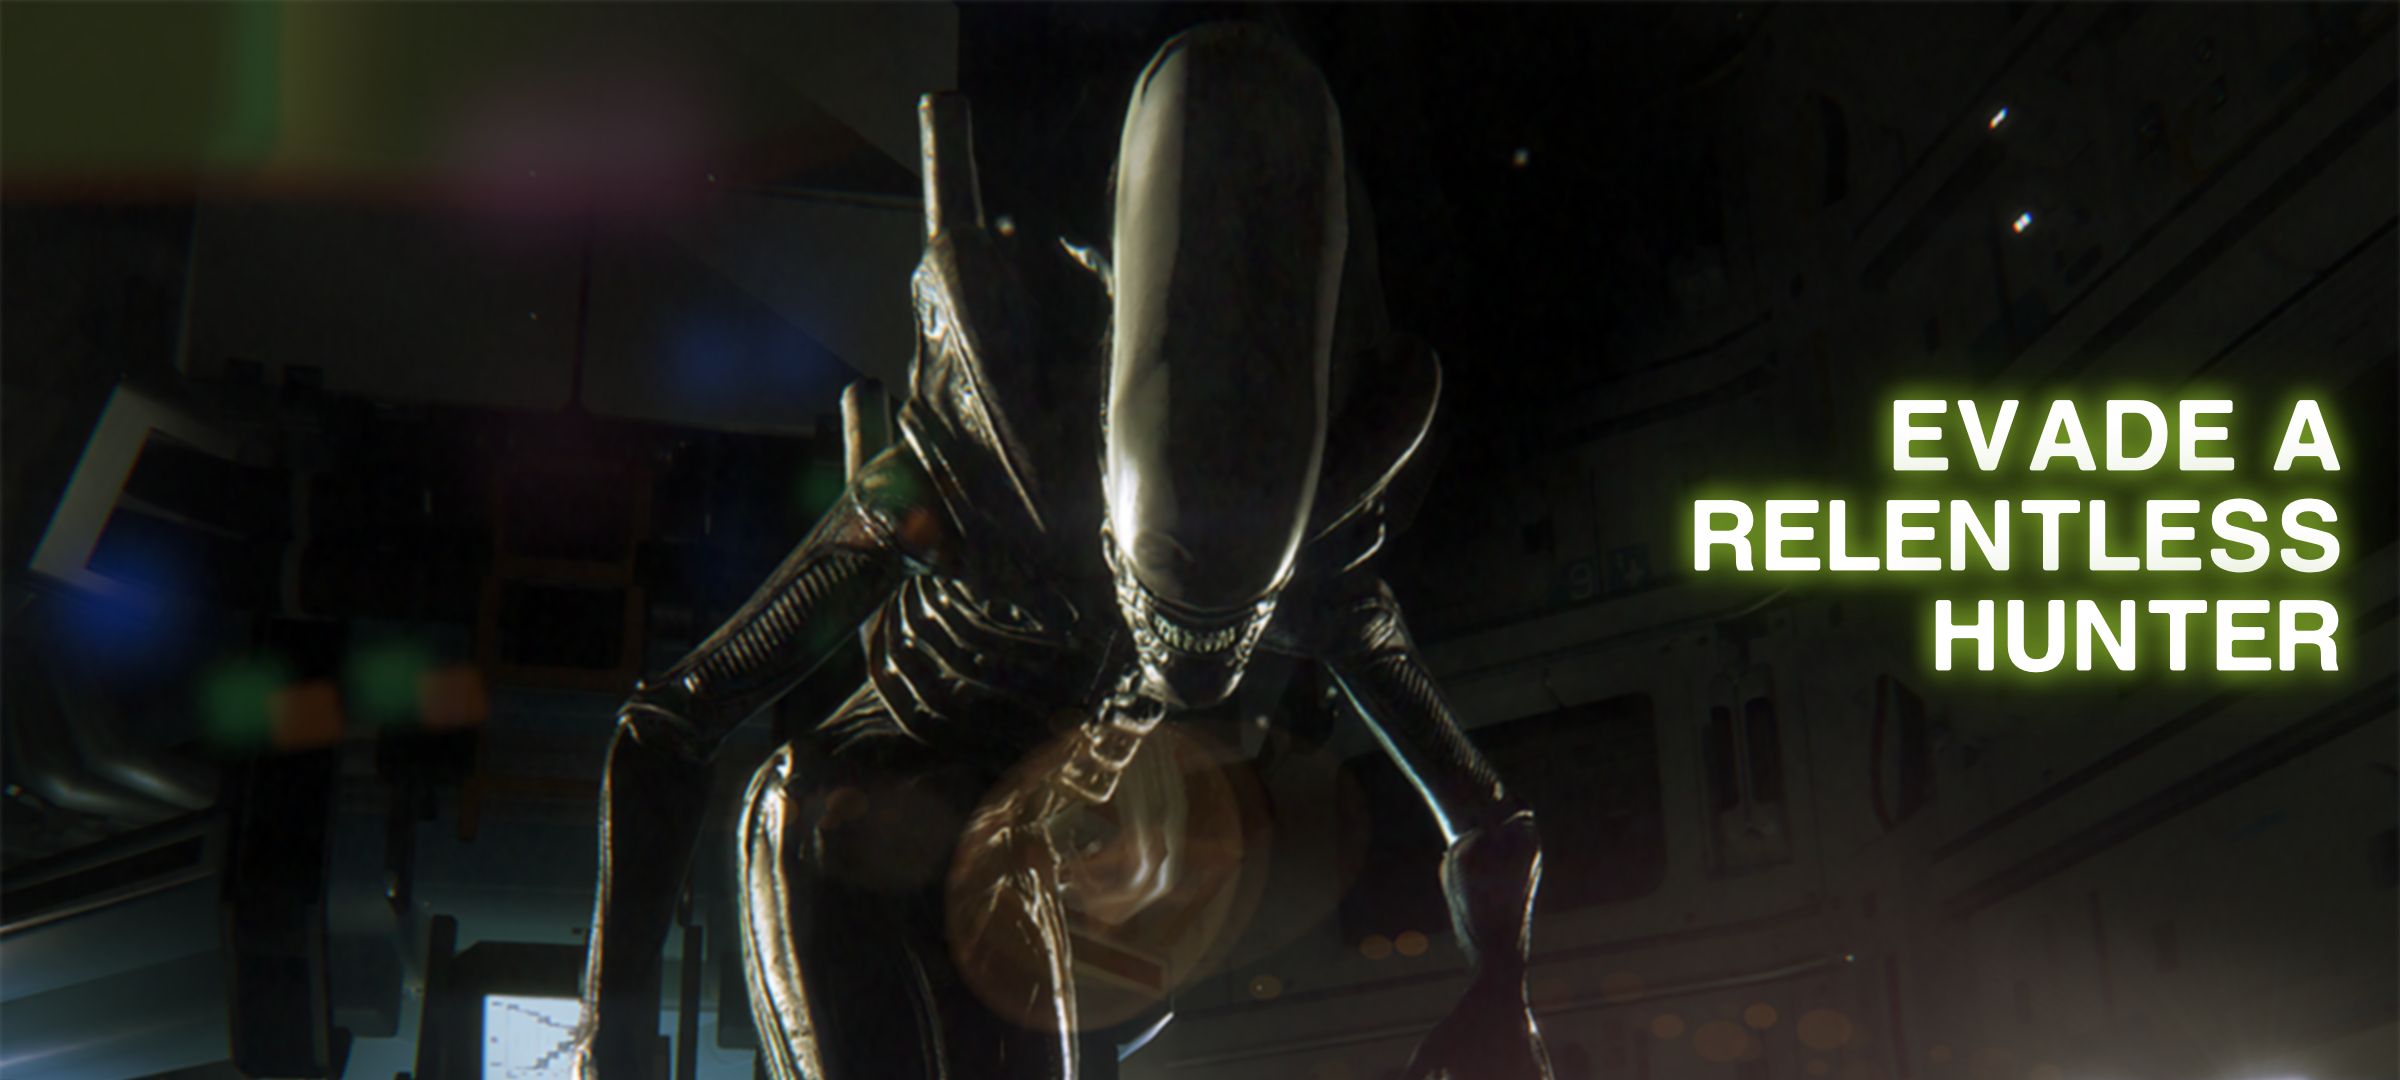 android-games-with-best-graphics-alien-isolation-evade-a-relentless-hunter